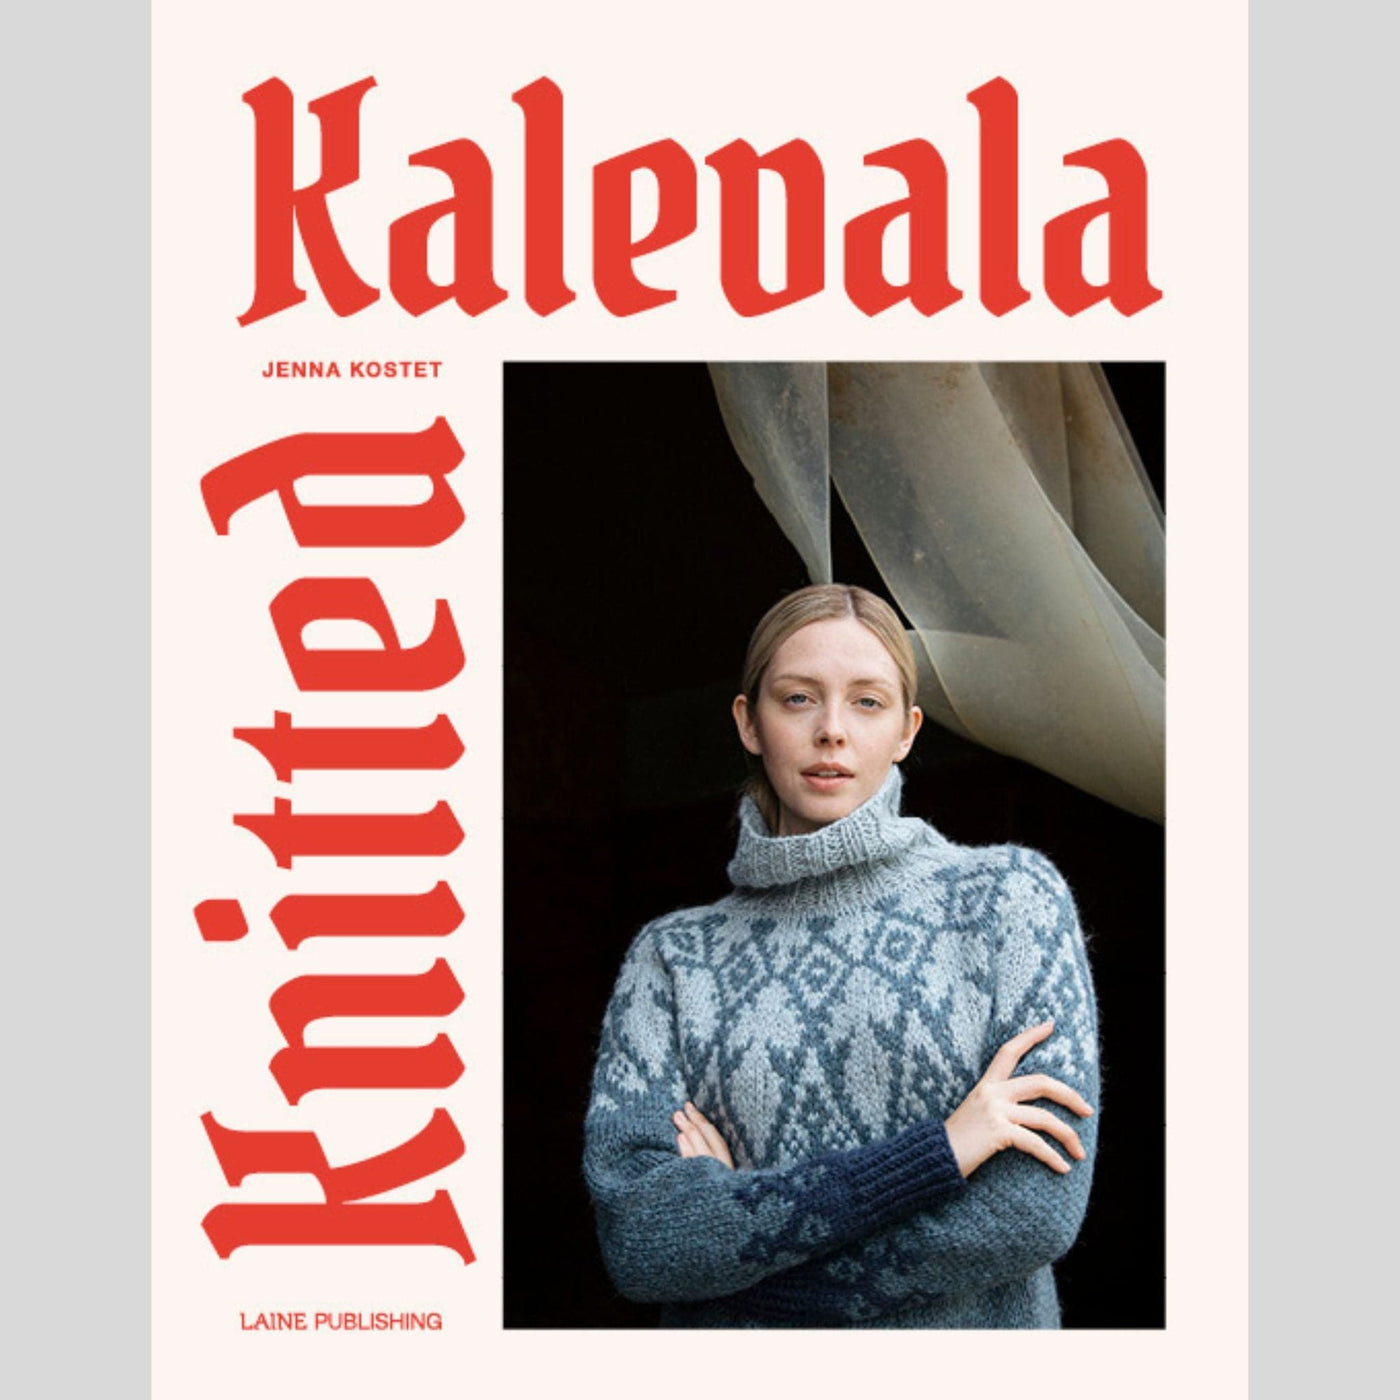 Knitted Kalevala book by Jenna Kostet from Laine Publishing. Cover shows woman wearing blue colorwork sweater. 